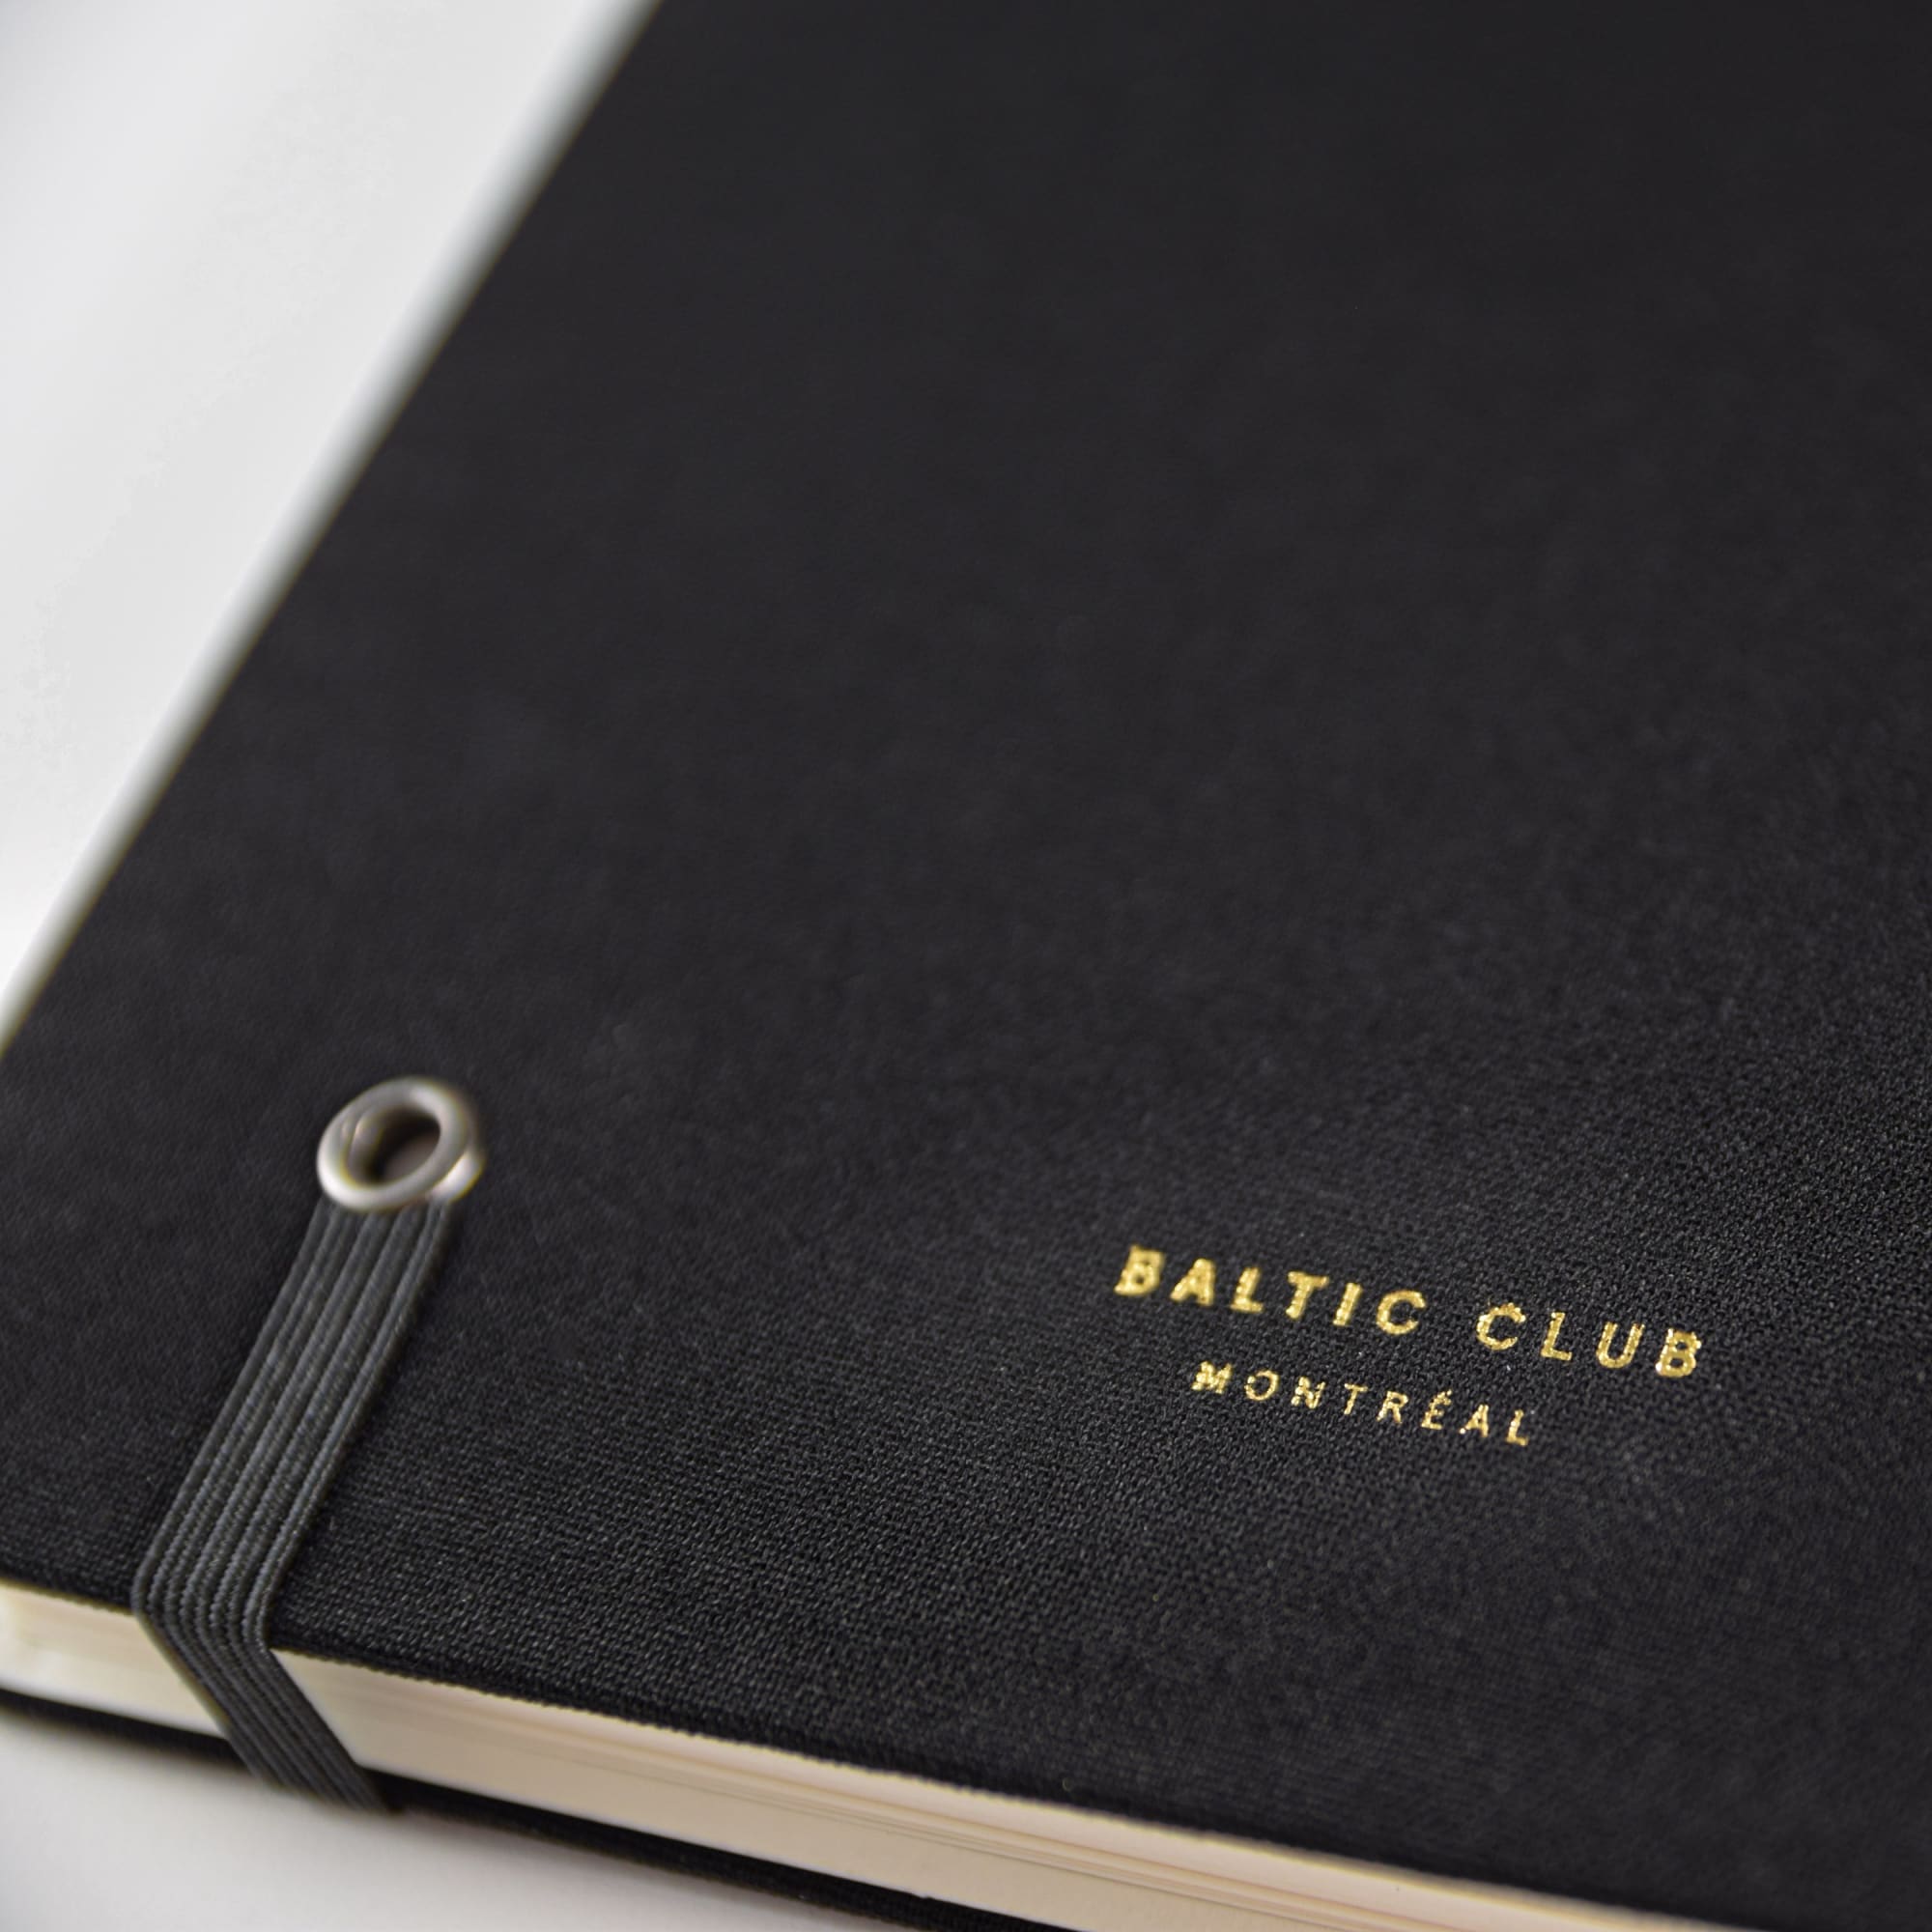 Foil stamping on the back of the Black Cloth-covered Undated Planner from The Baltic Club